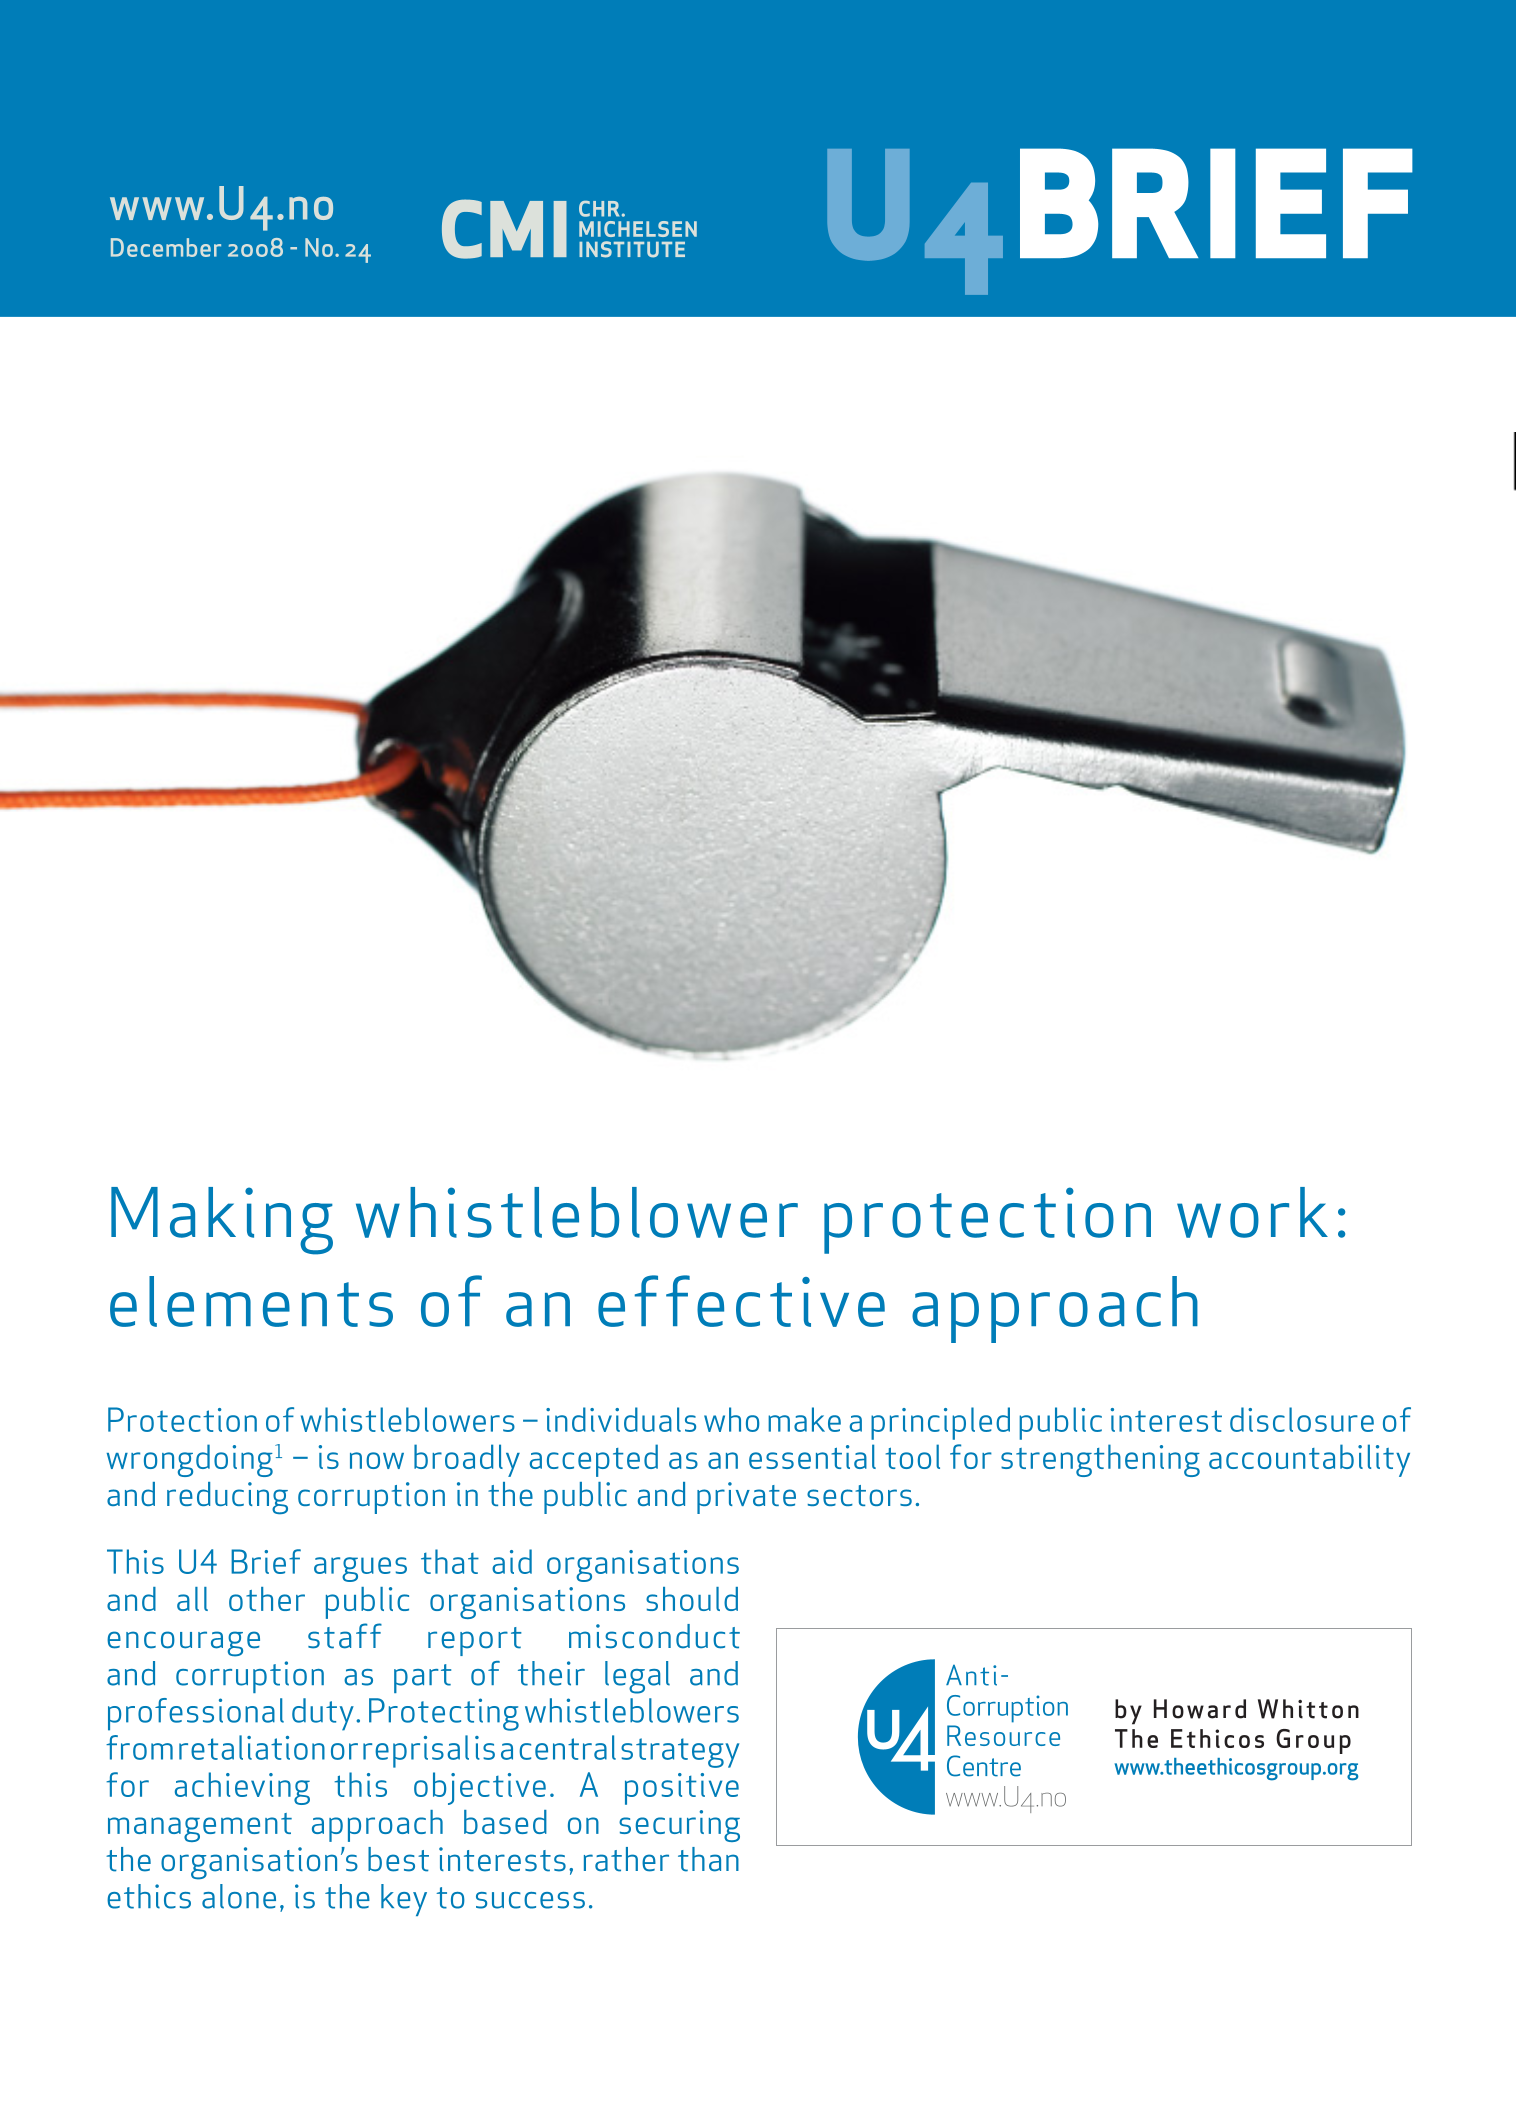 Making Whistleblower Protection Work: Elements of an Effective Approach